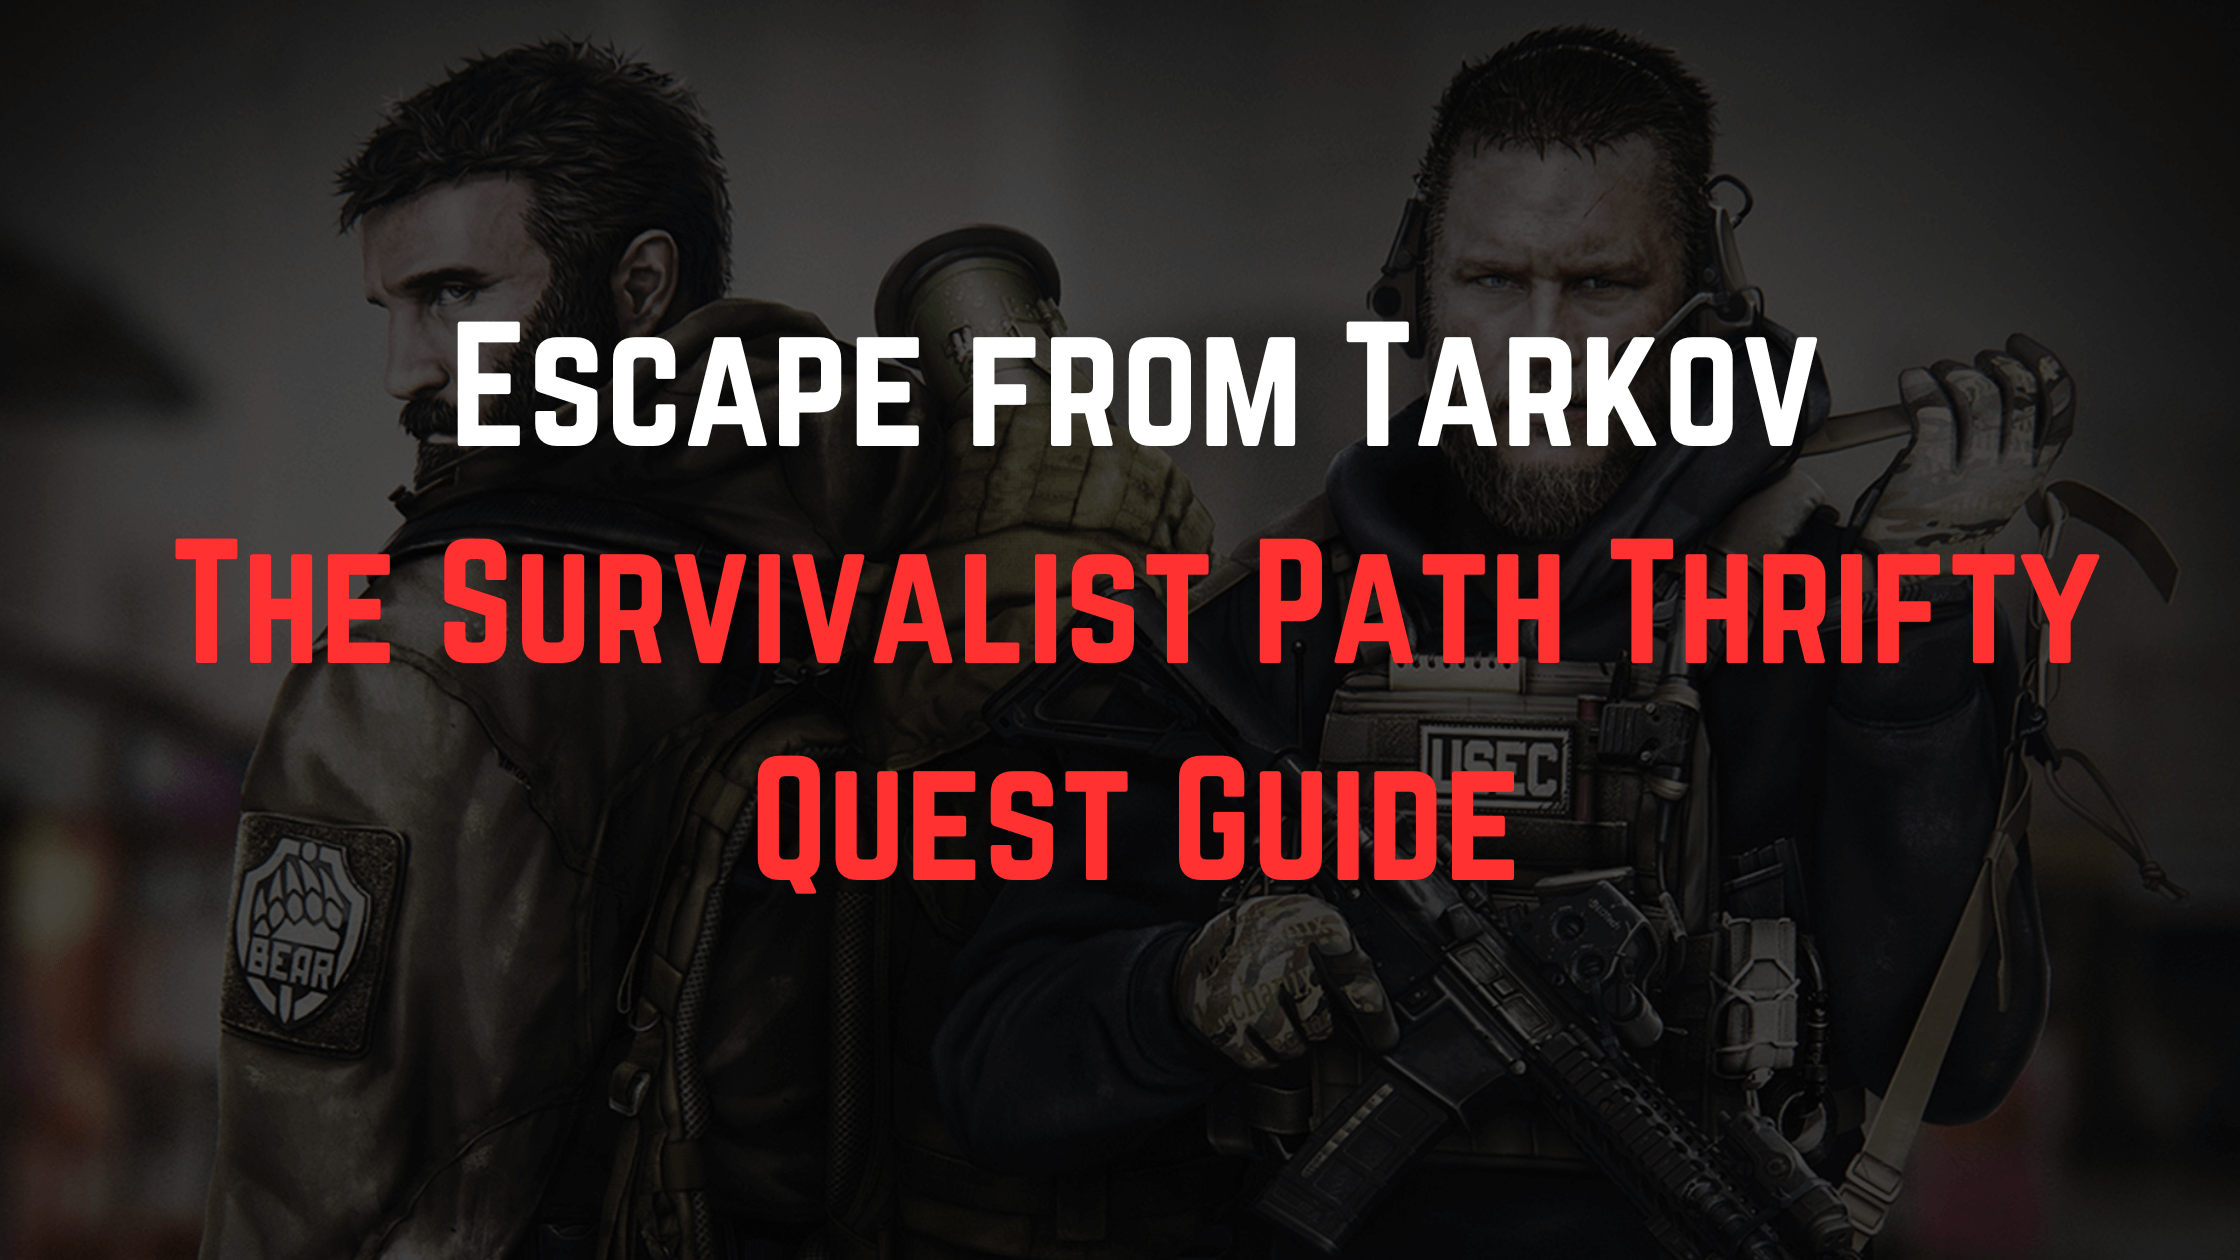 Escape from Tarkov The Survivalist Path Thrifty